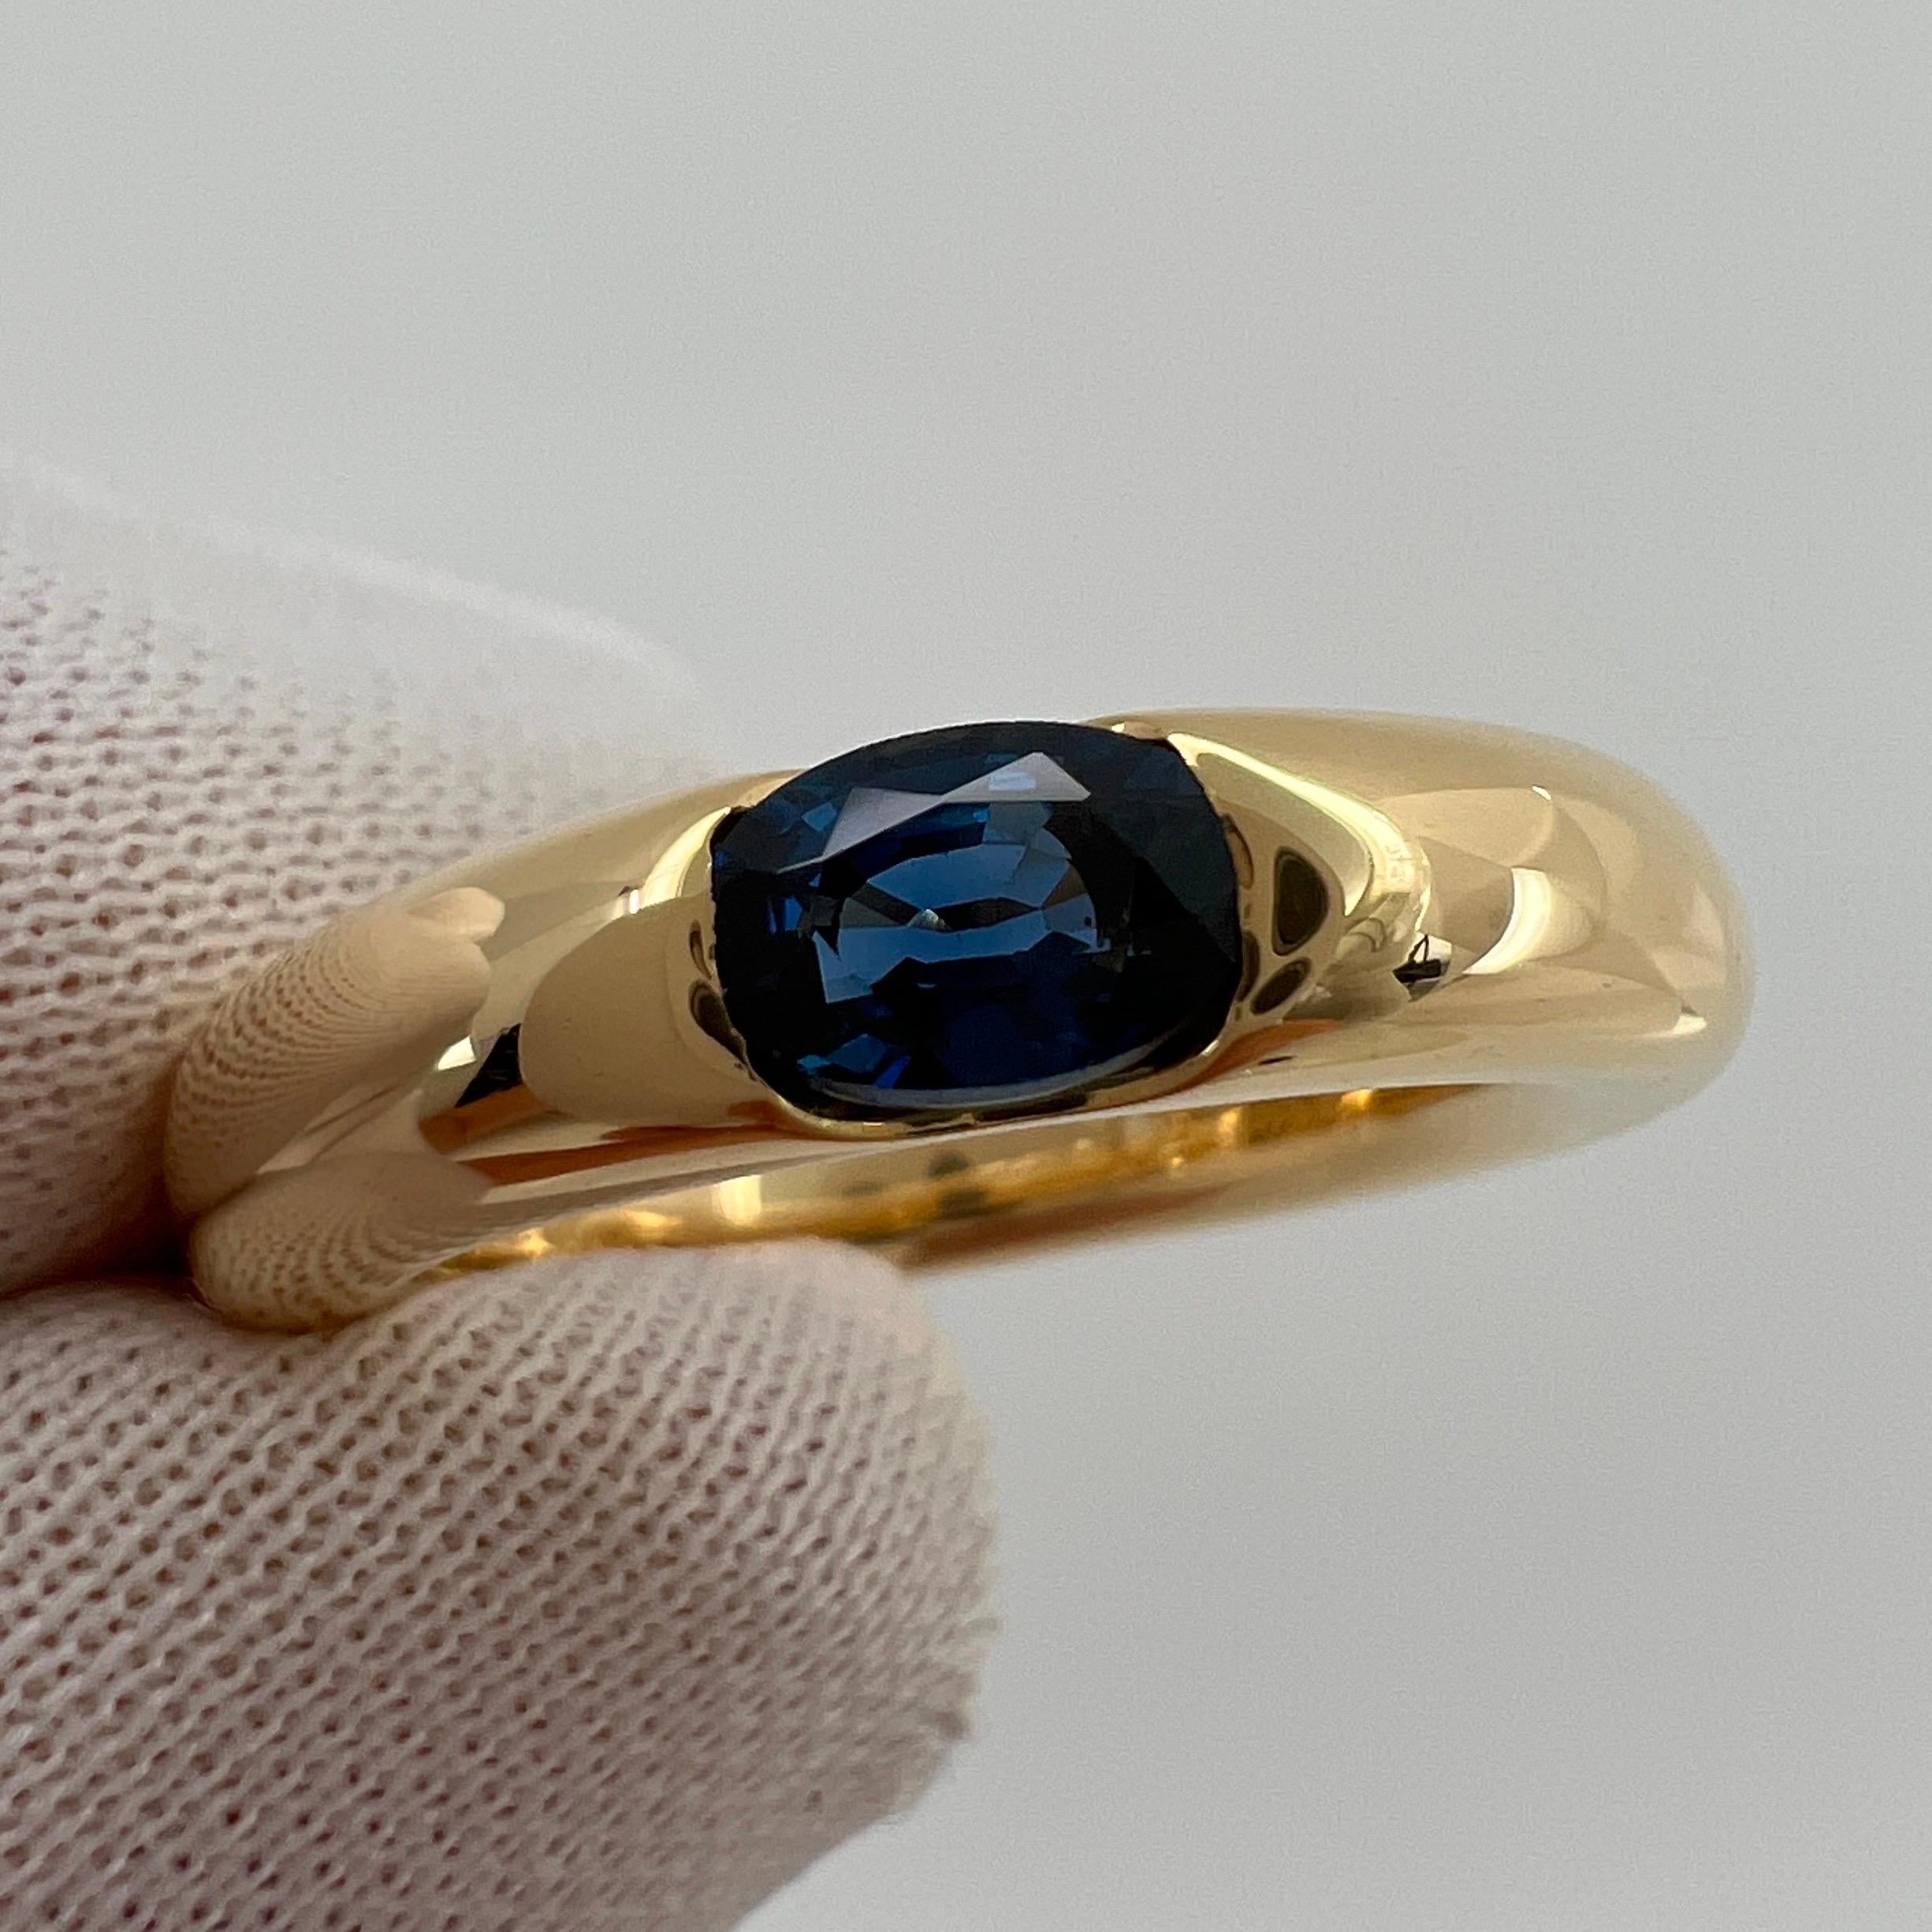 Vintage Cartier Deep Blue Sapphire Oval Ellipse 18k Yellow Gold Solitaire Ring 2